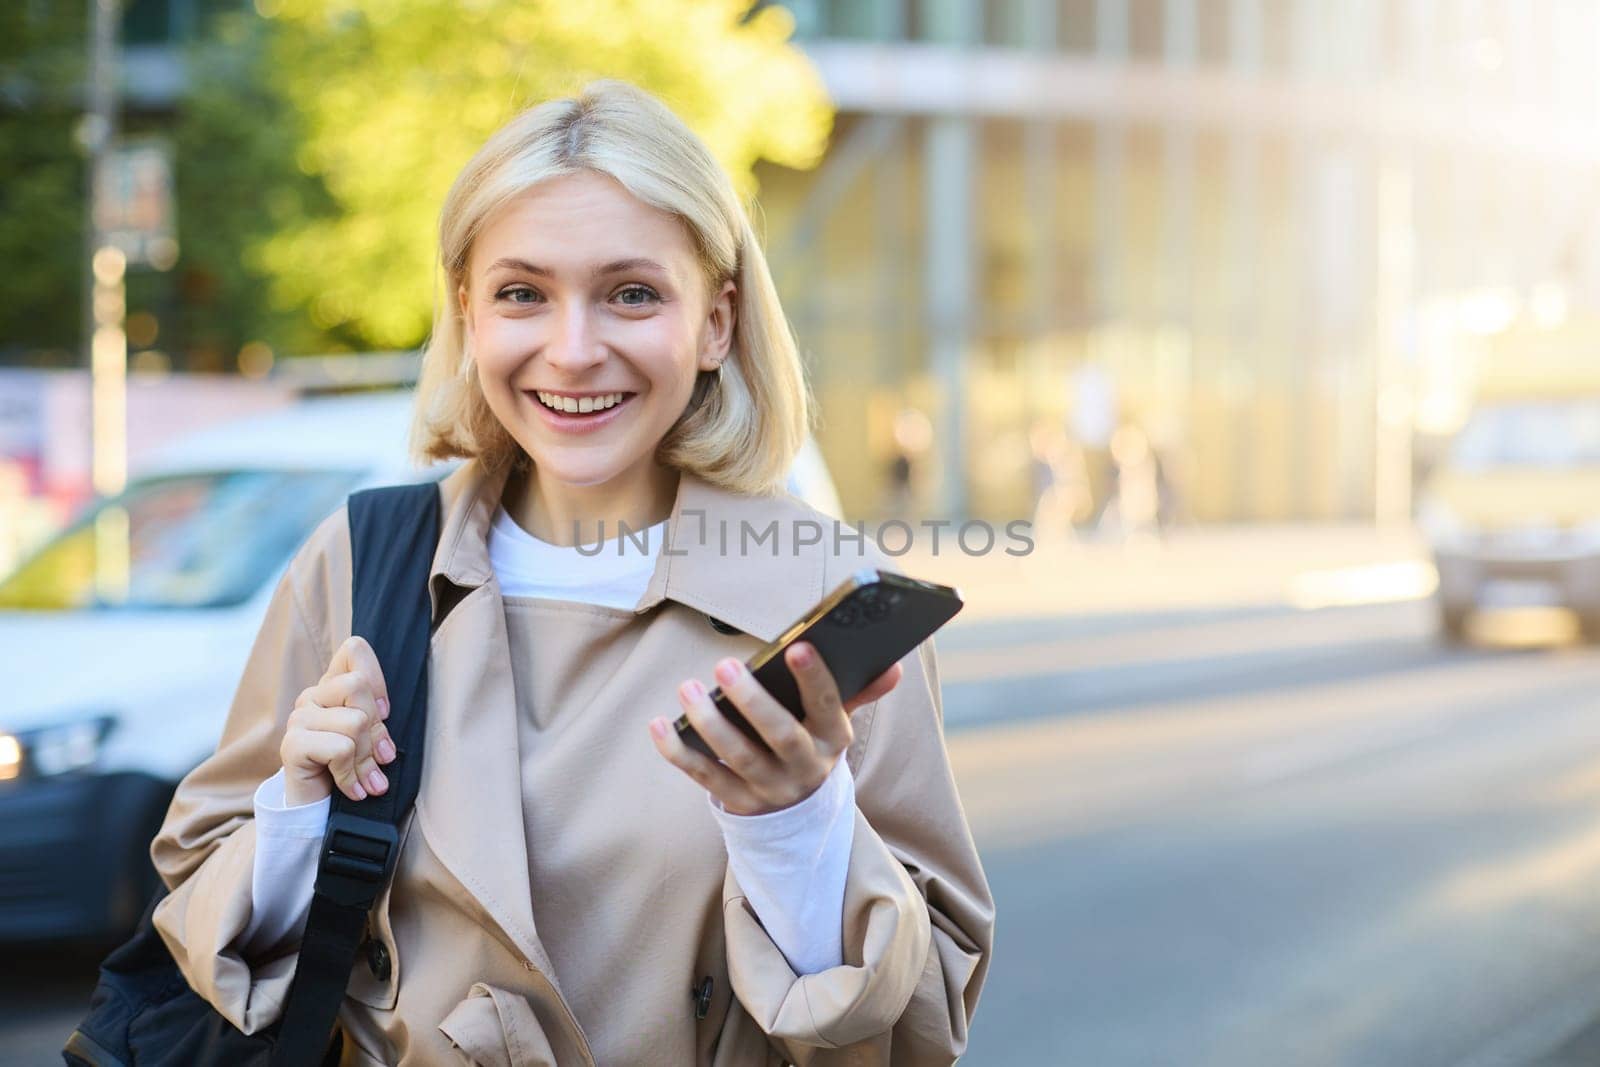 Close up portrait of young modern woman, standing on street, university student with mobile phone, looking happy and smiling at camera, using smartphone map app.